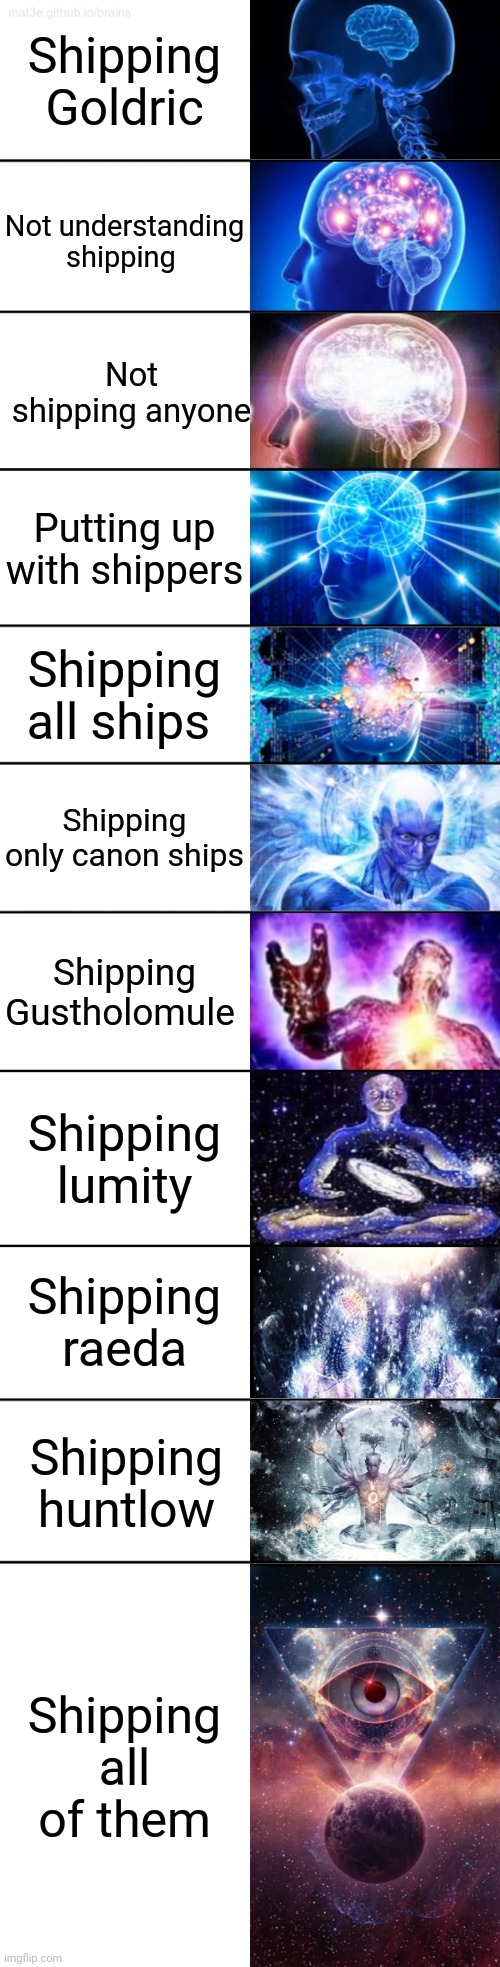 11-Tier Expanding Brain | Shipping Goldric; Not understanding shipping; Not shipping anyone; Putting up with shippers; Shipping all ships; Shipping only canon ships; Shipping Gustholomule; Shipping lumity; Shipping raeda; Shipping huntlow; Shipping all of them | image tagged in 11-tier expanding brain | made w/ Imgflip meme maker